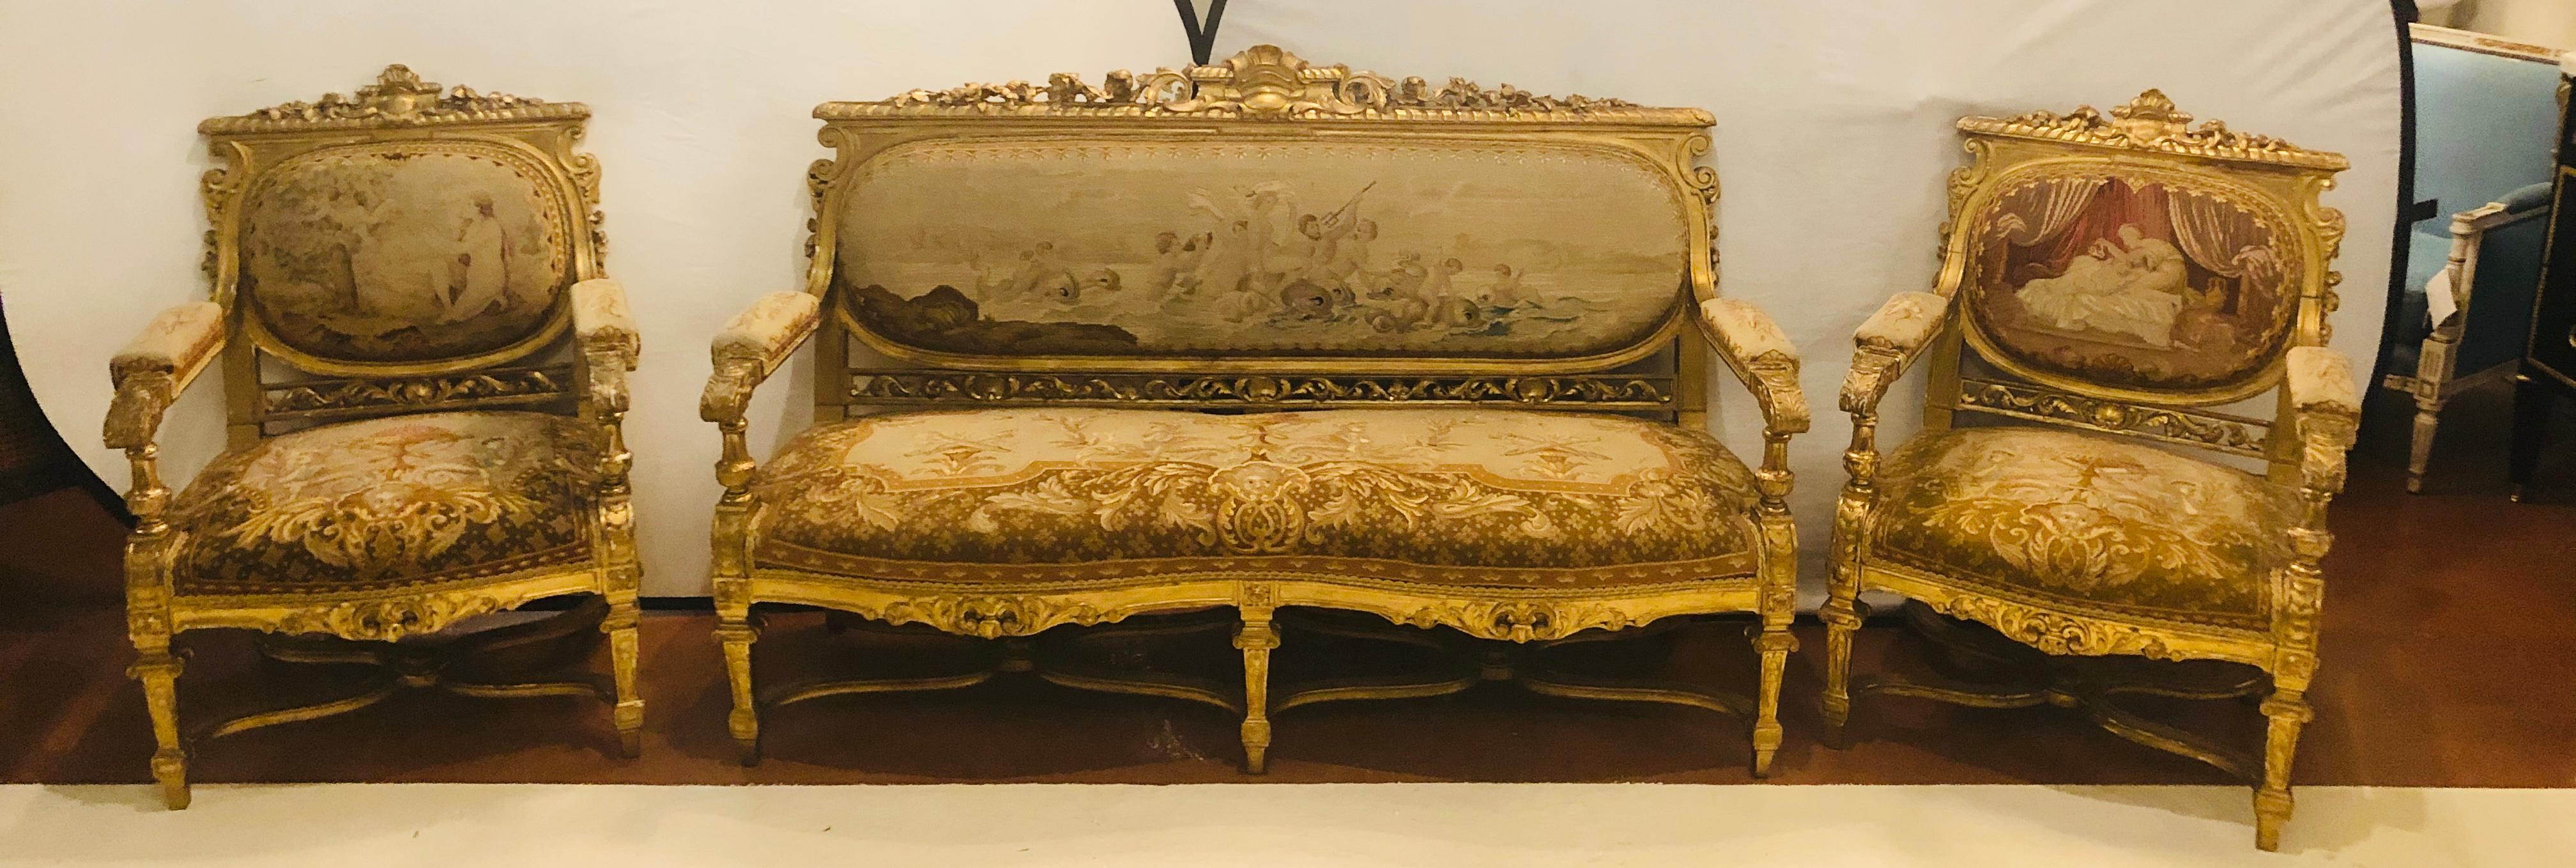 19th century Louis XIV Style Parlor Suite / Salon set three-piece French giltwood petite point and gros point in spectacular shape given the age. The giltwood frame strong an sturdy and the upholstery bright and colorful. A lovely settee canapé and